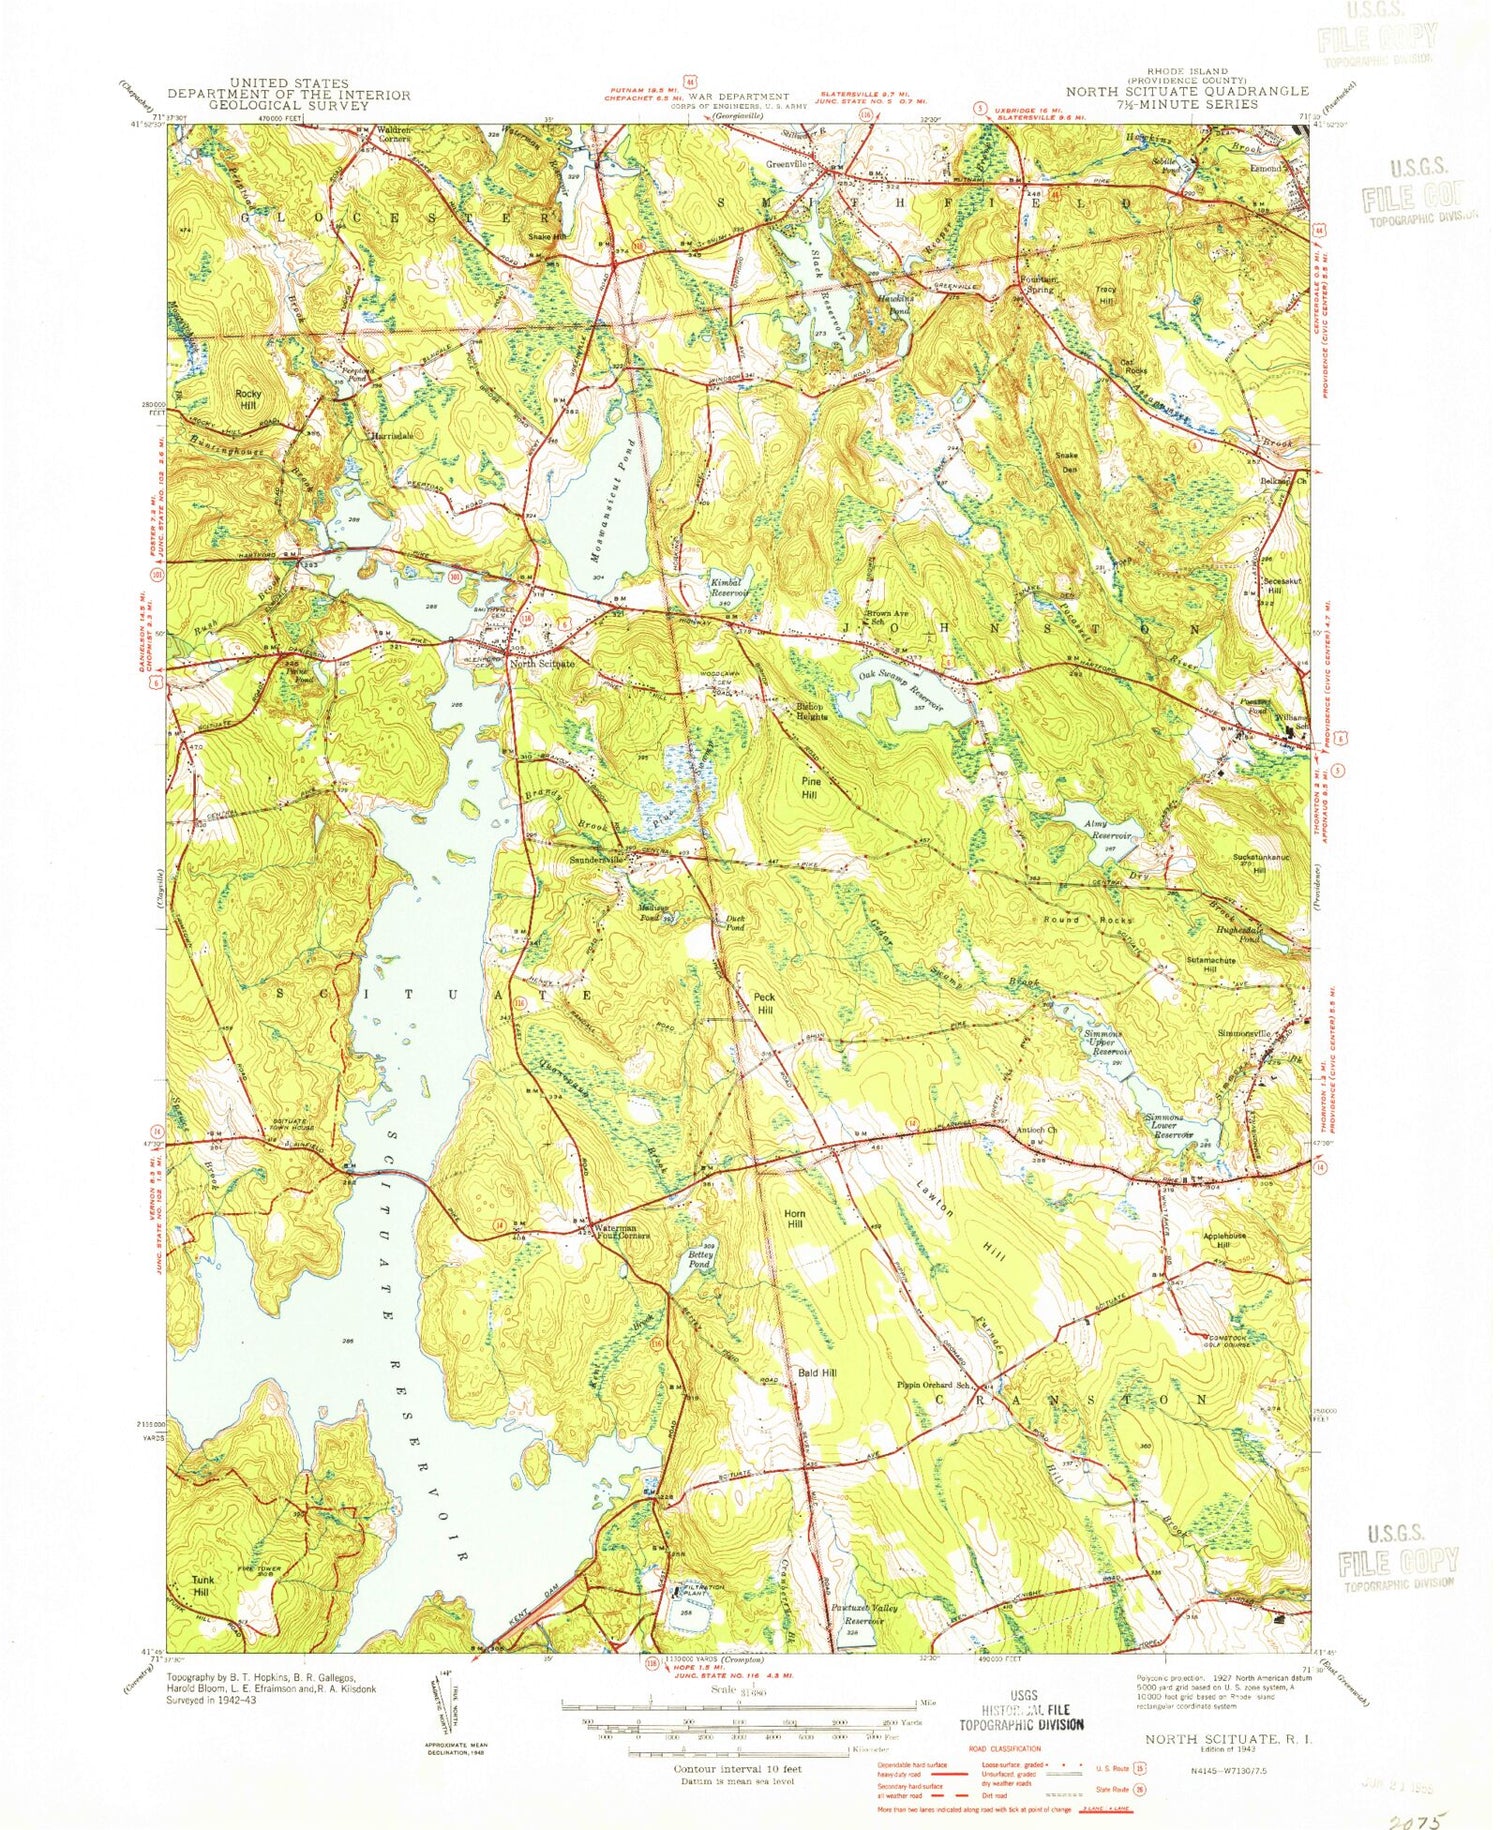 Classic USGS North Scituate Rhode Island 7.5'x7.5' Topo Map Image